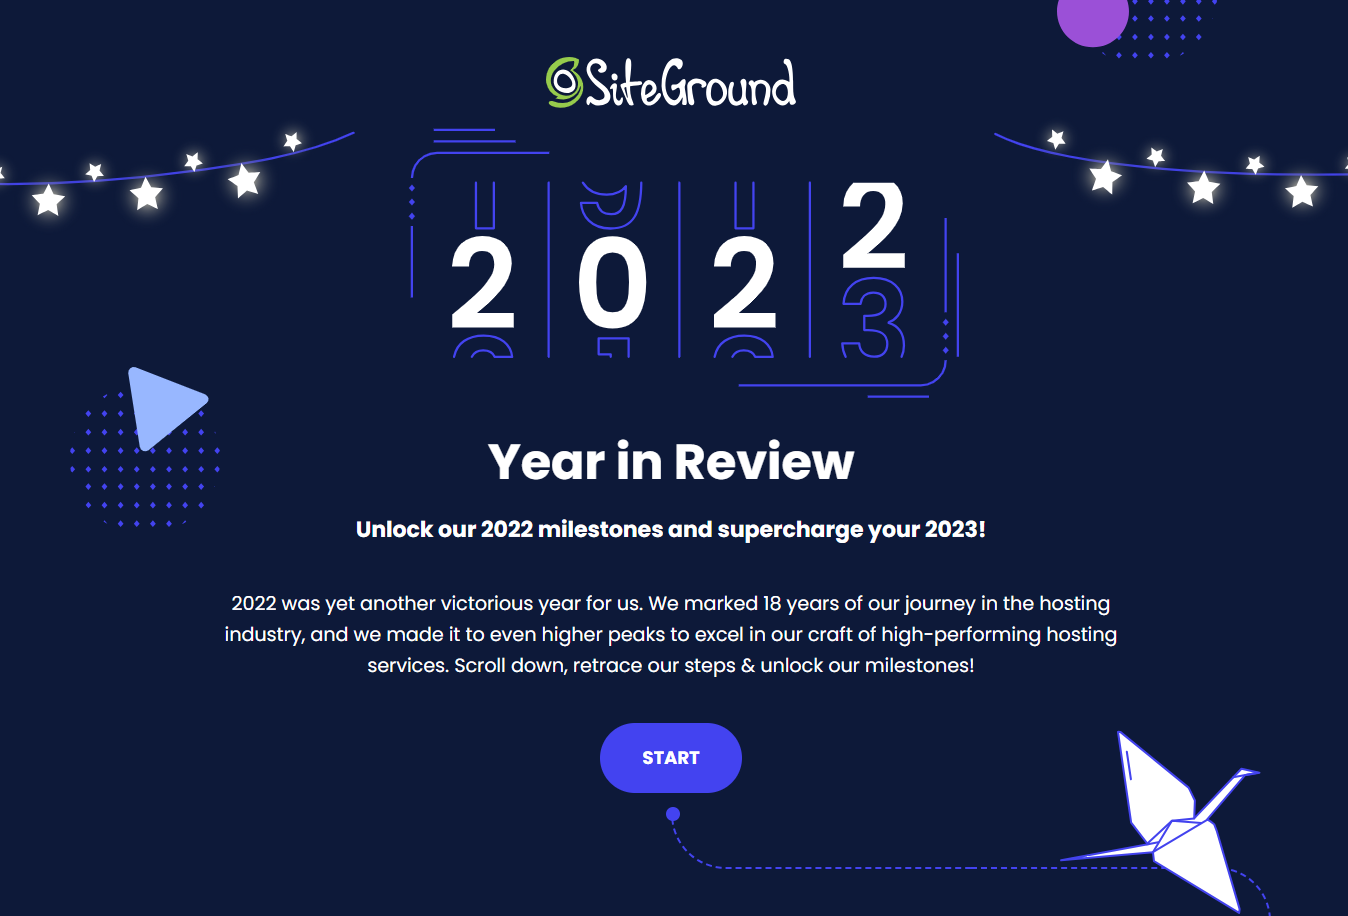 Year-in-review emails: Screenshot of SiteGround's year-in-review email